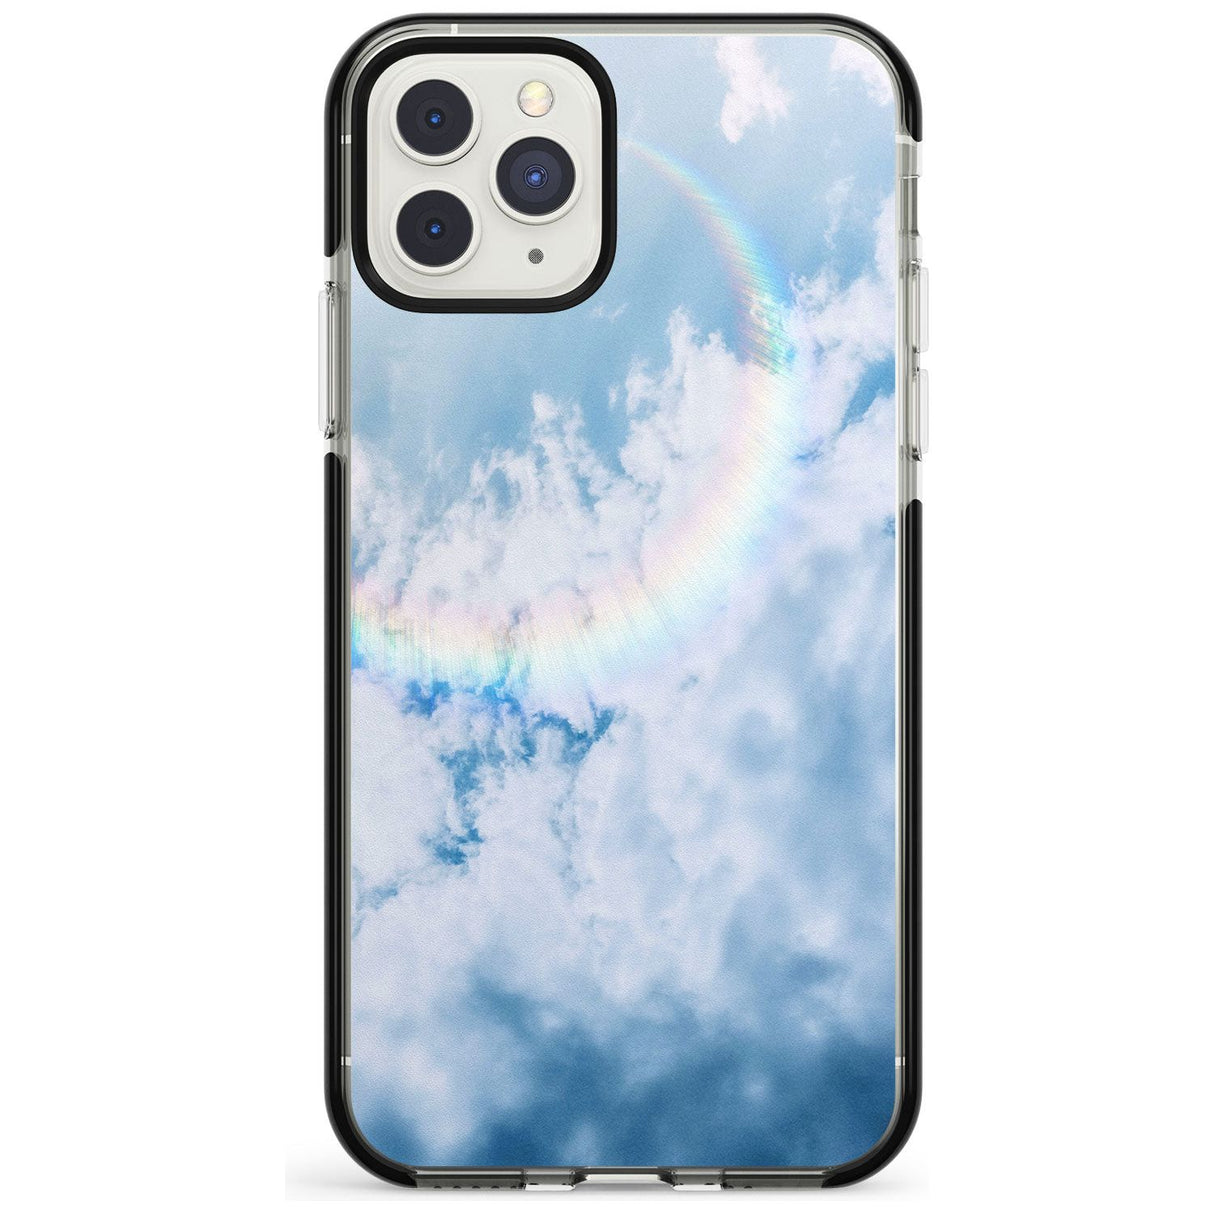 Rainbow Light Flare Photograph Black Impact Phone Case for iPhone 11 Pro Max